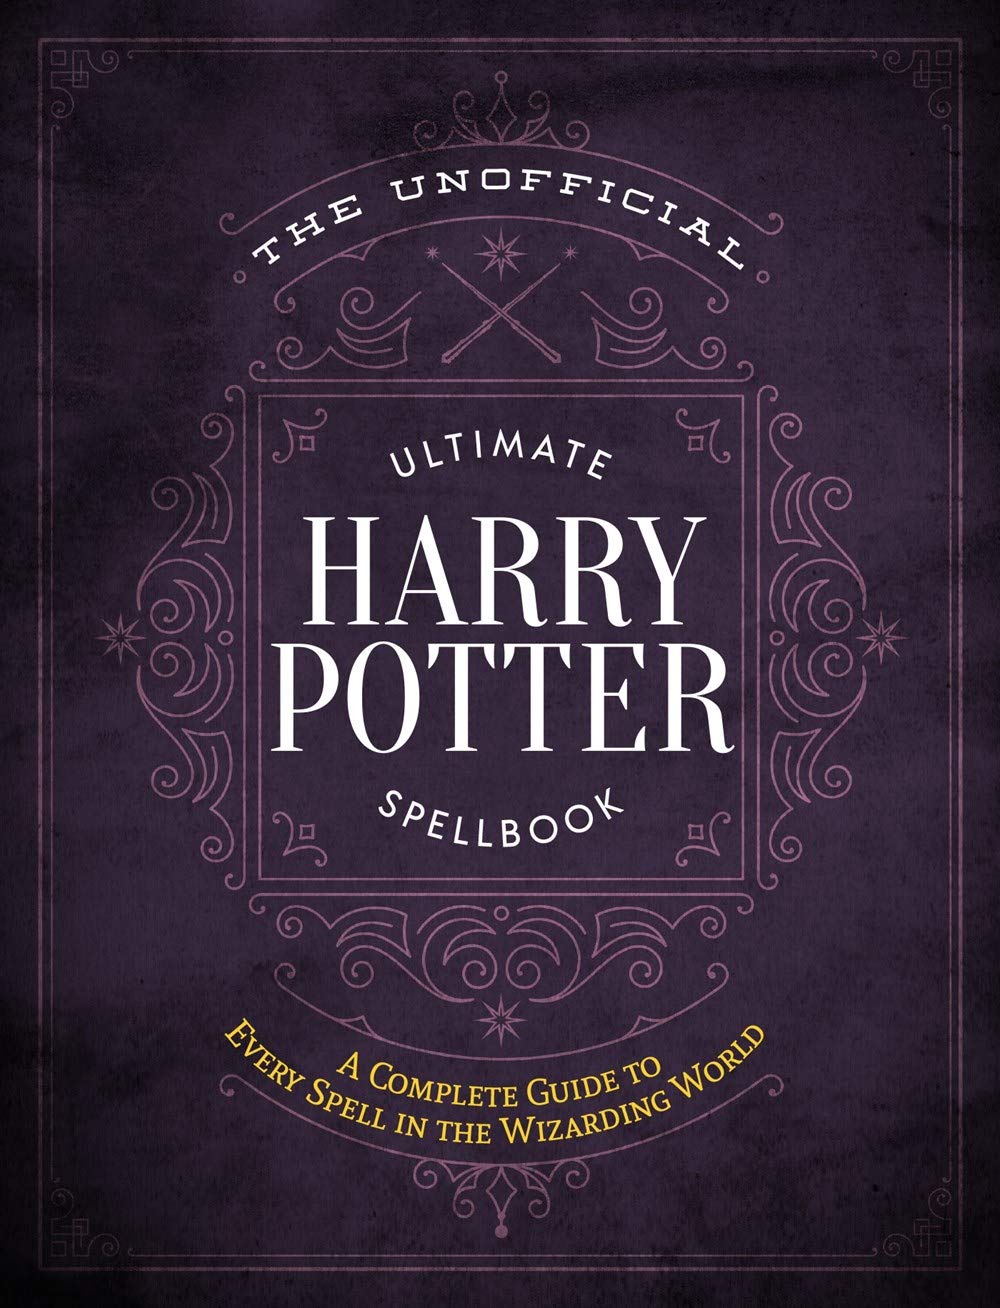 The Unofficial Ultimate Harry Potter Spellbook – AESOP'S FABLE